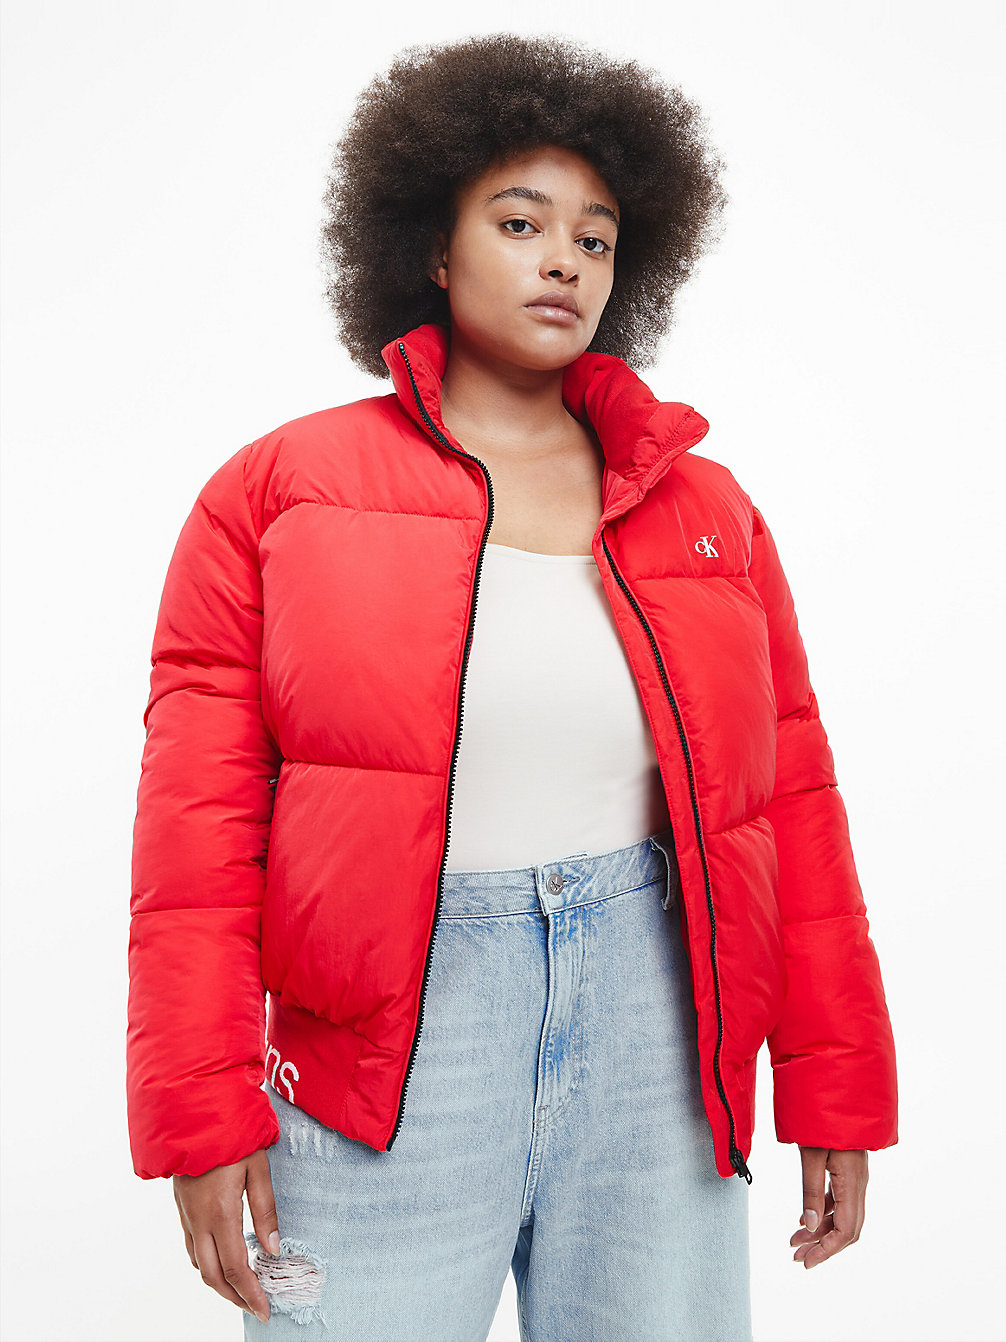 CANDY APPLE Bomber In Nylon Riciclato Plus Size undefined donna Calvin Klein